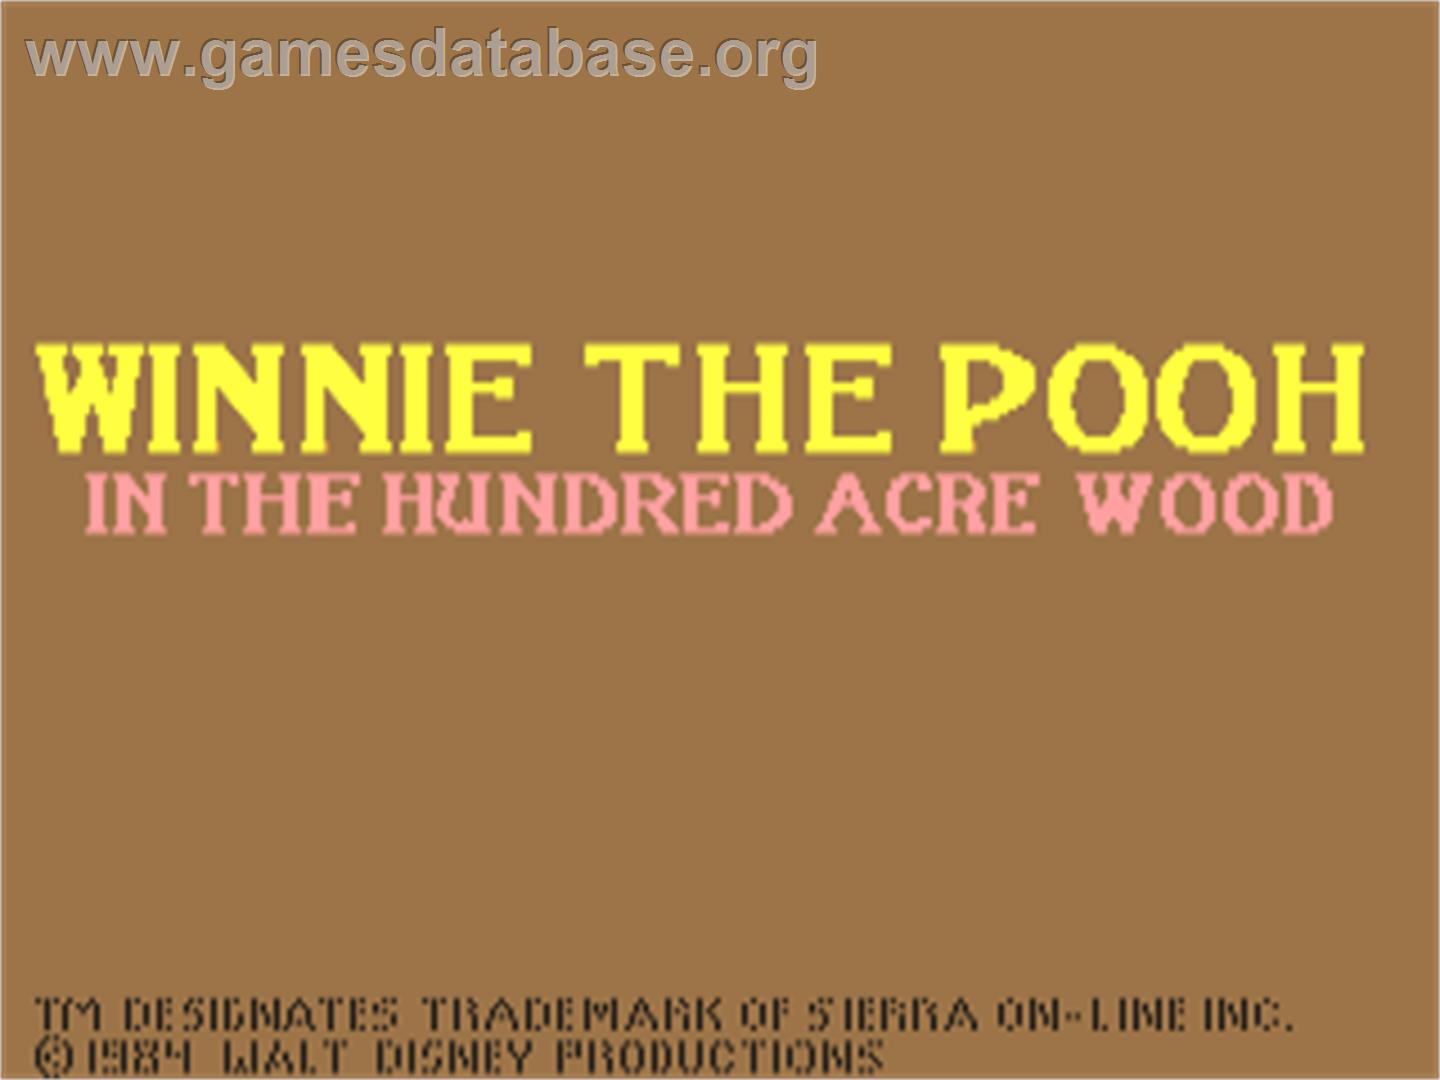 Winnie the Pooh in the Hundred Acre Wood - Commodore 64 - Artwork - Title Screen